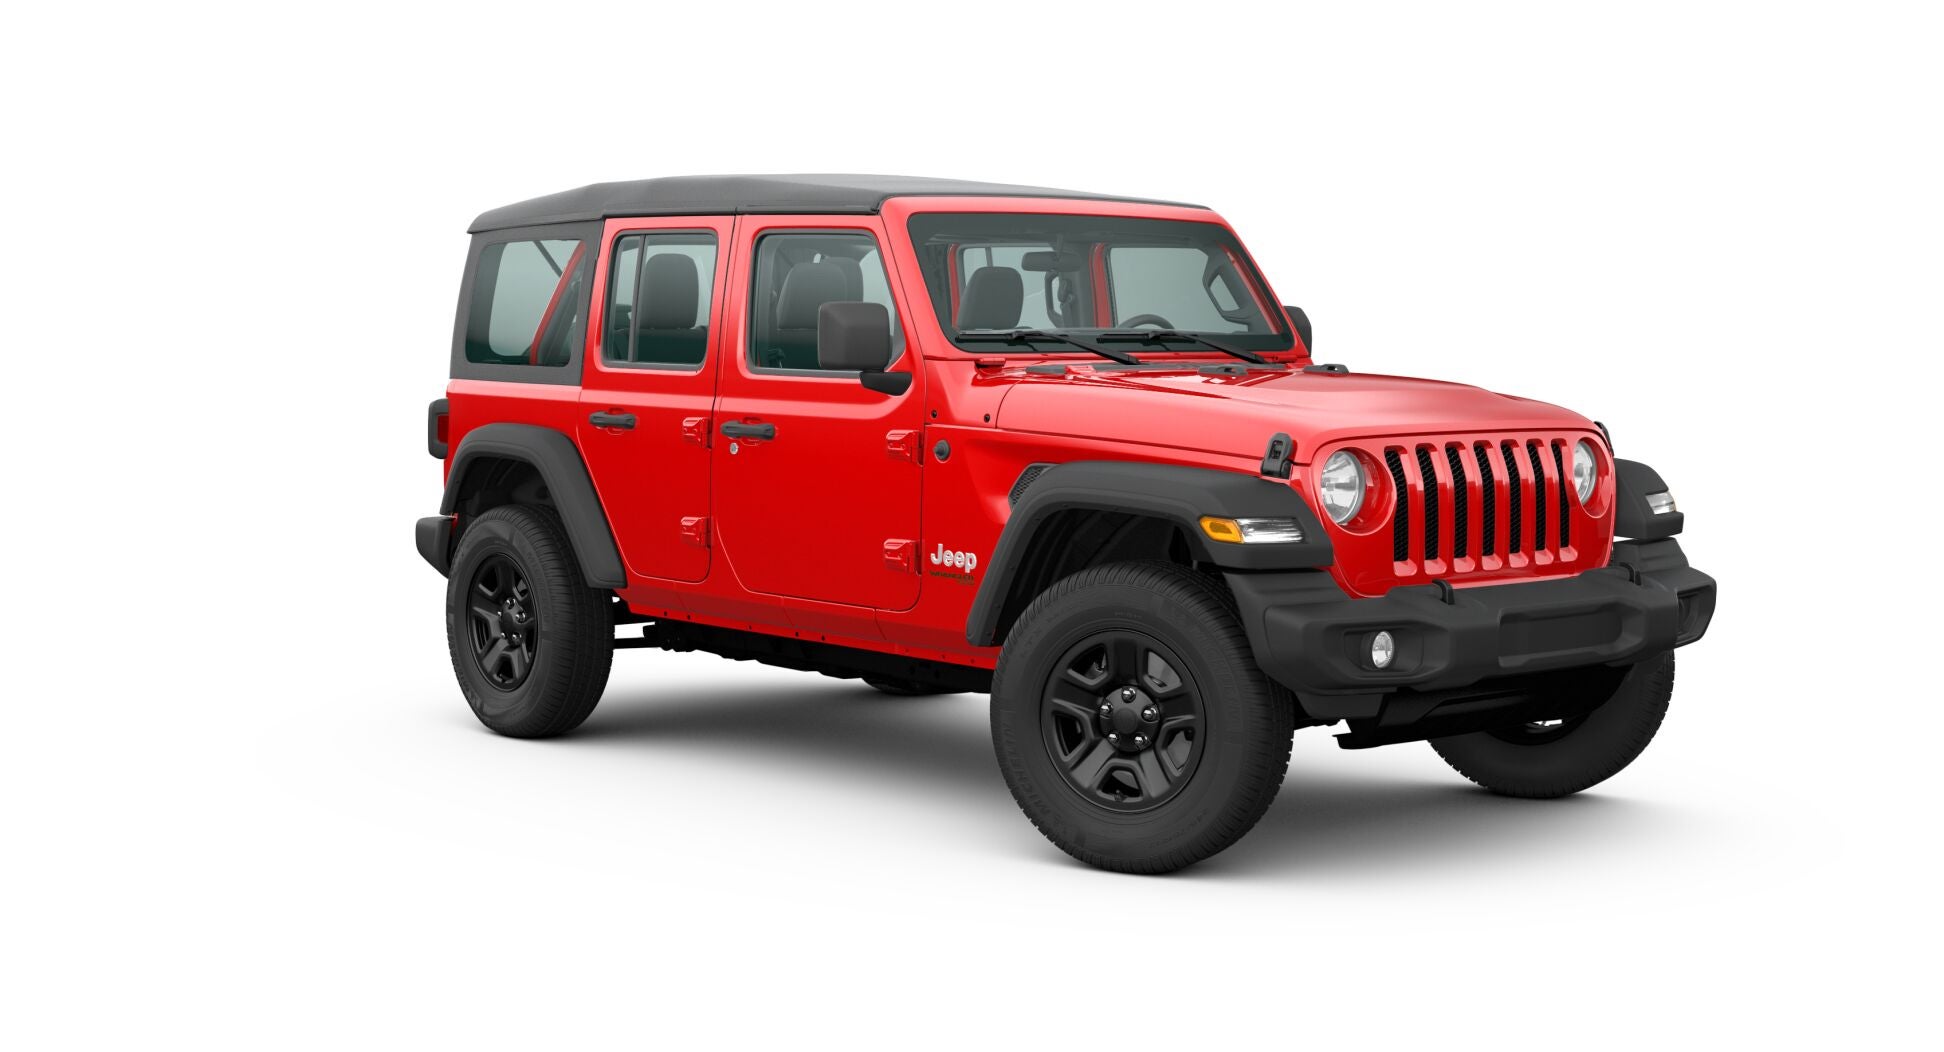 2020 Jeep Wrangler Lease Deal | $249 for 36 Months | Rolla, MO